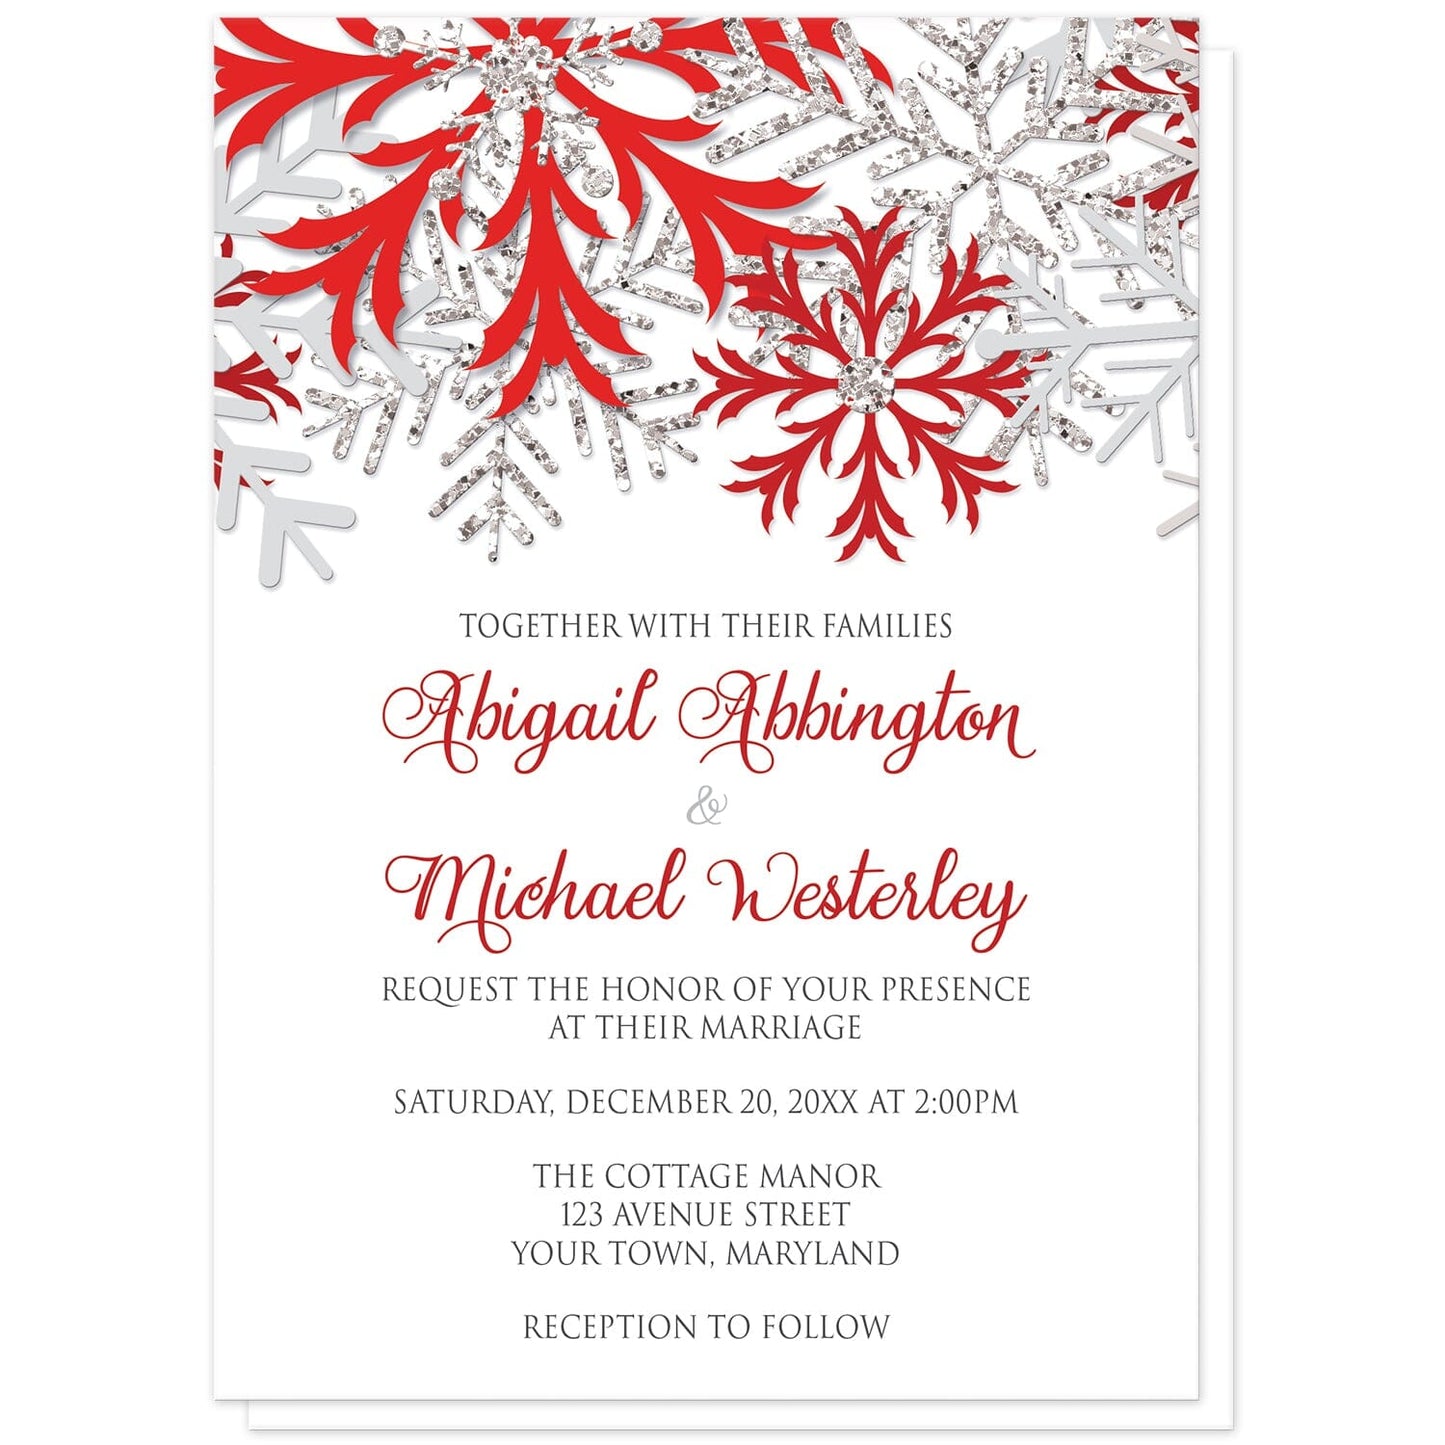 Winter Red Silver Snowflake Wedding Invitations at Artistically Invited. Beautiful winter red silver snowflake wedding invitations designed with red, darker red, silver-colored glitter-illustrated, and light gray snowflakes along the top over a white background. Your personalized marriage celebration details are custom printed in red and gray below the pretty snowflakes.